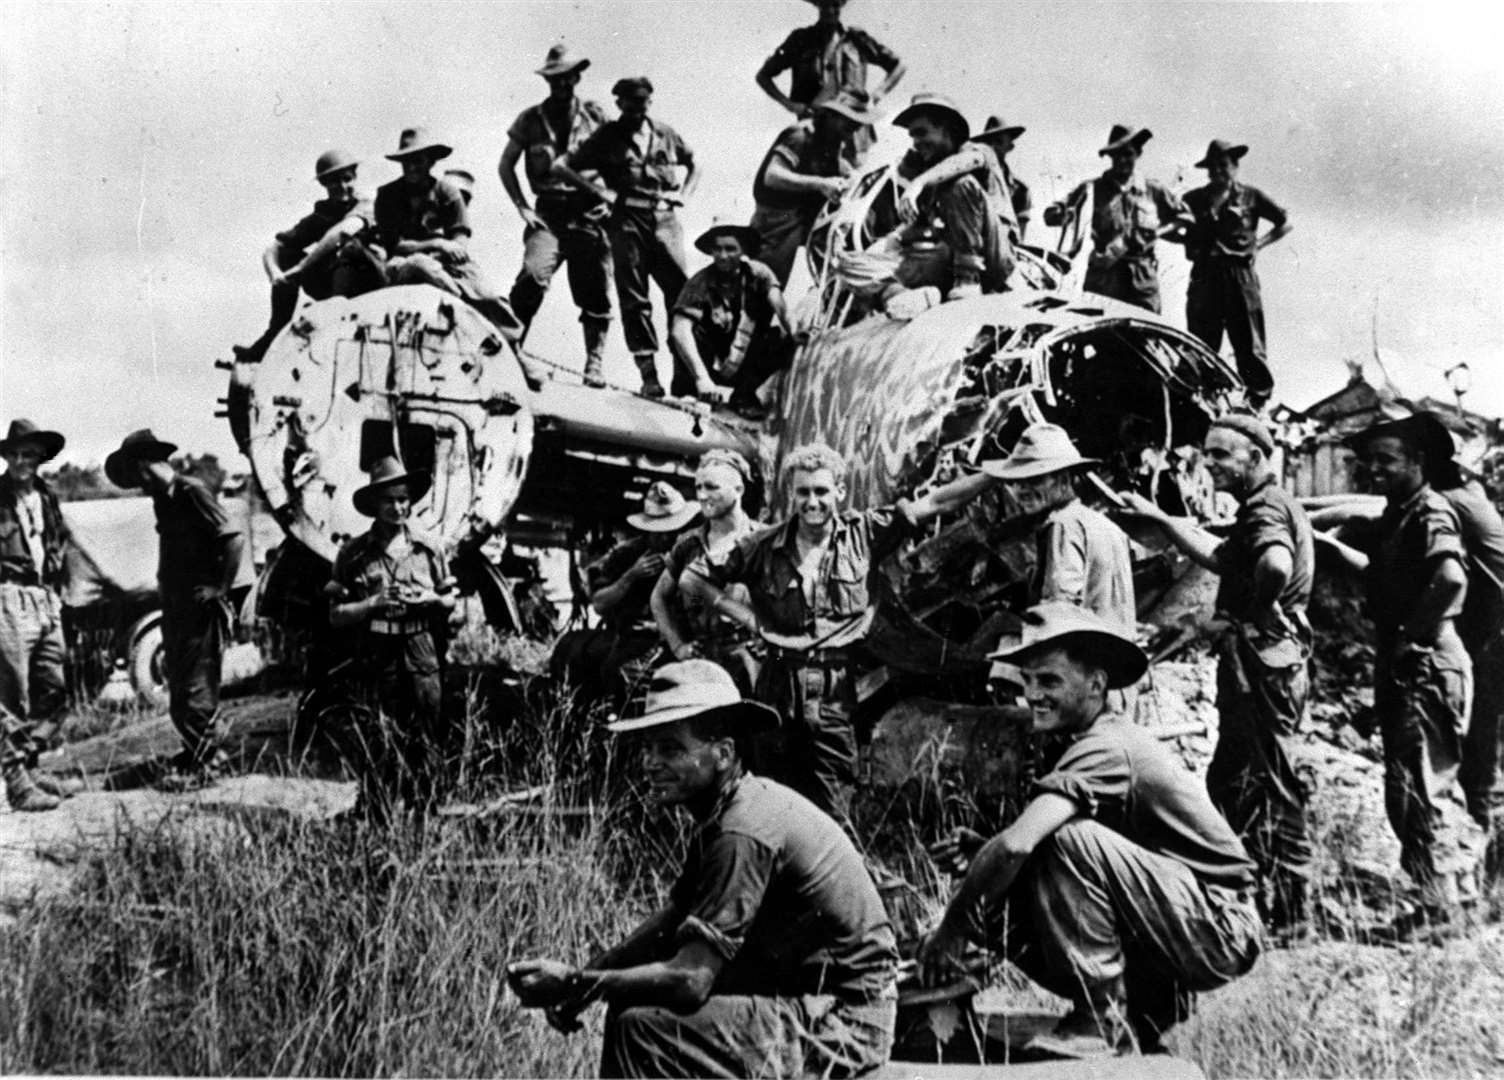 Members of the battalion from the Australian 9th Division climb over a wrecked Japanese bomber abandoned on the edge of the strip in Borneo (PA)